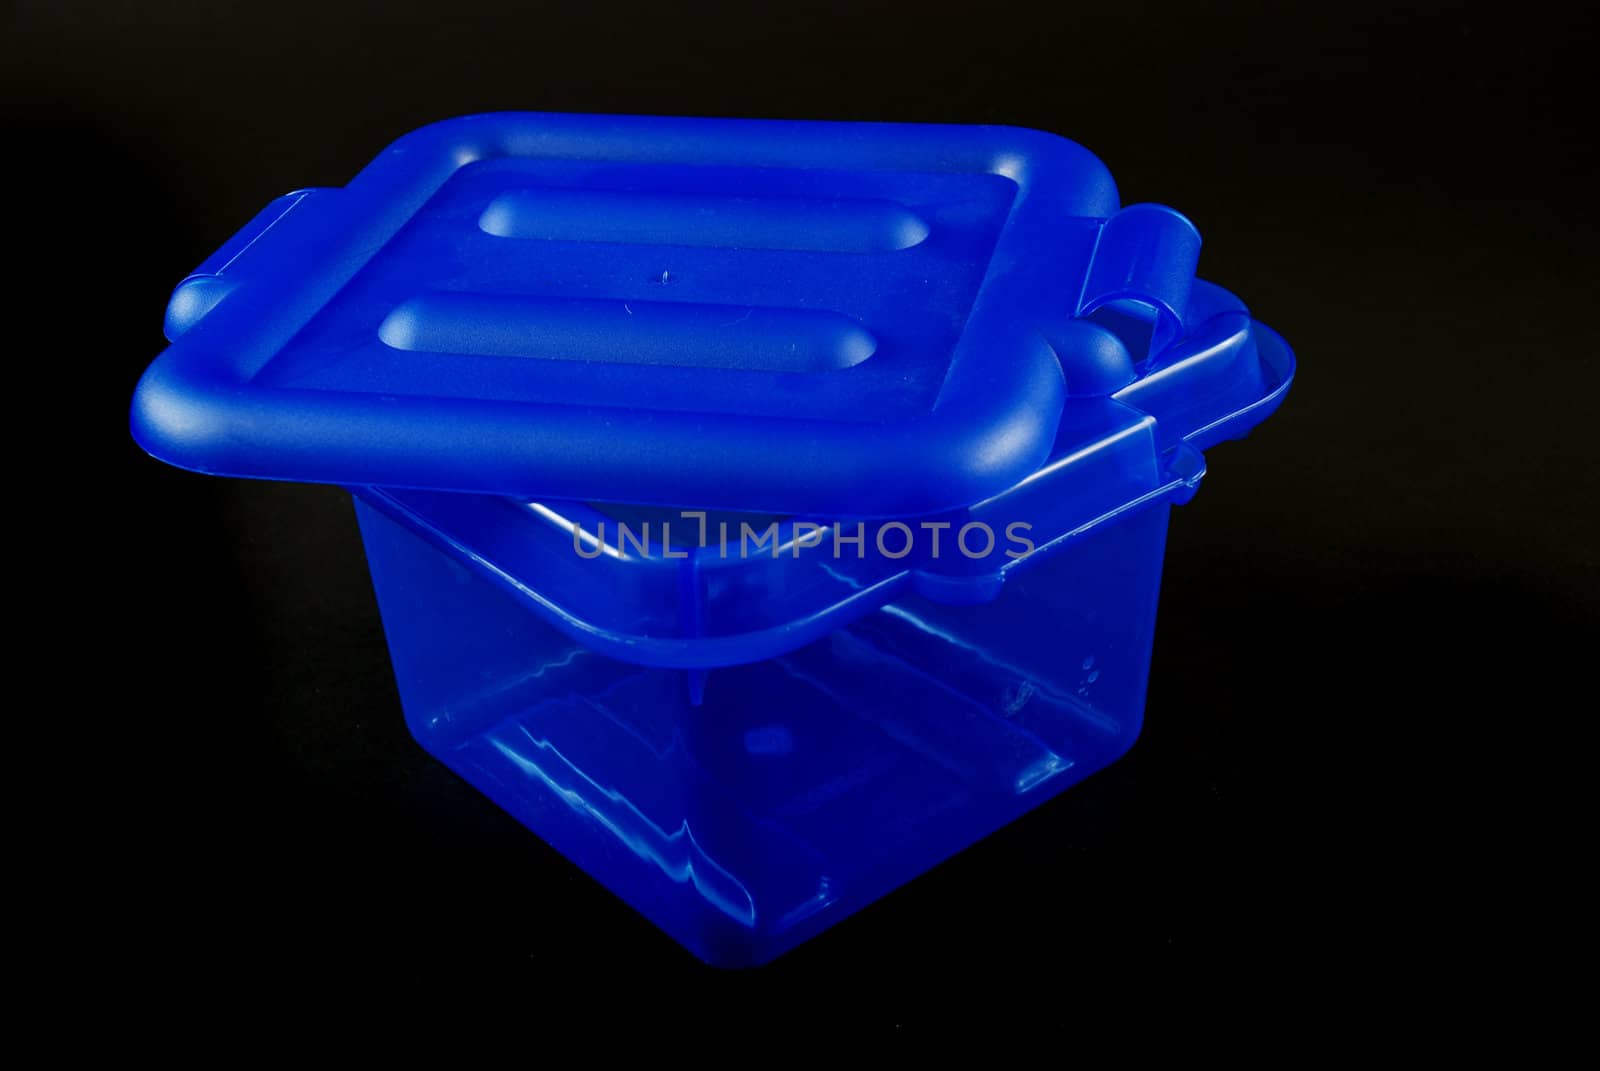 pictures of blue plastic clear containers for storage